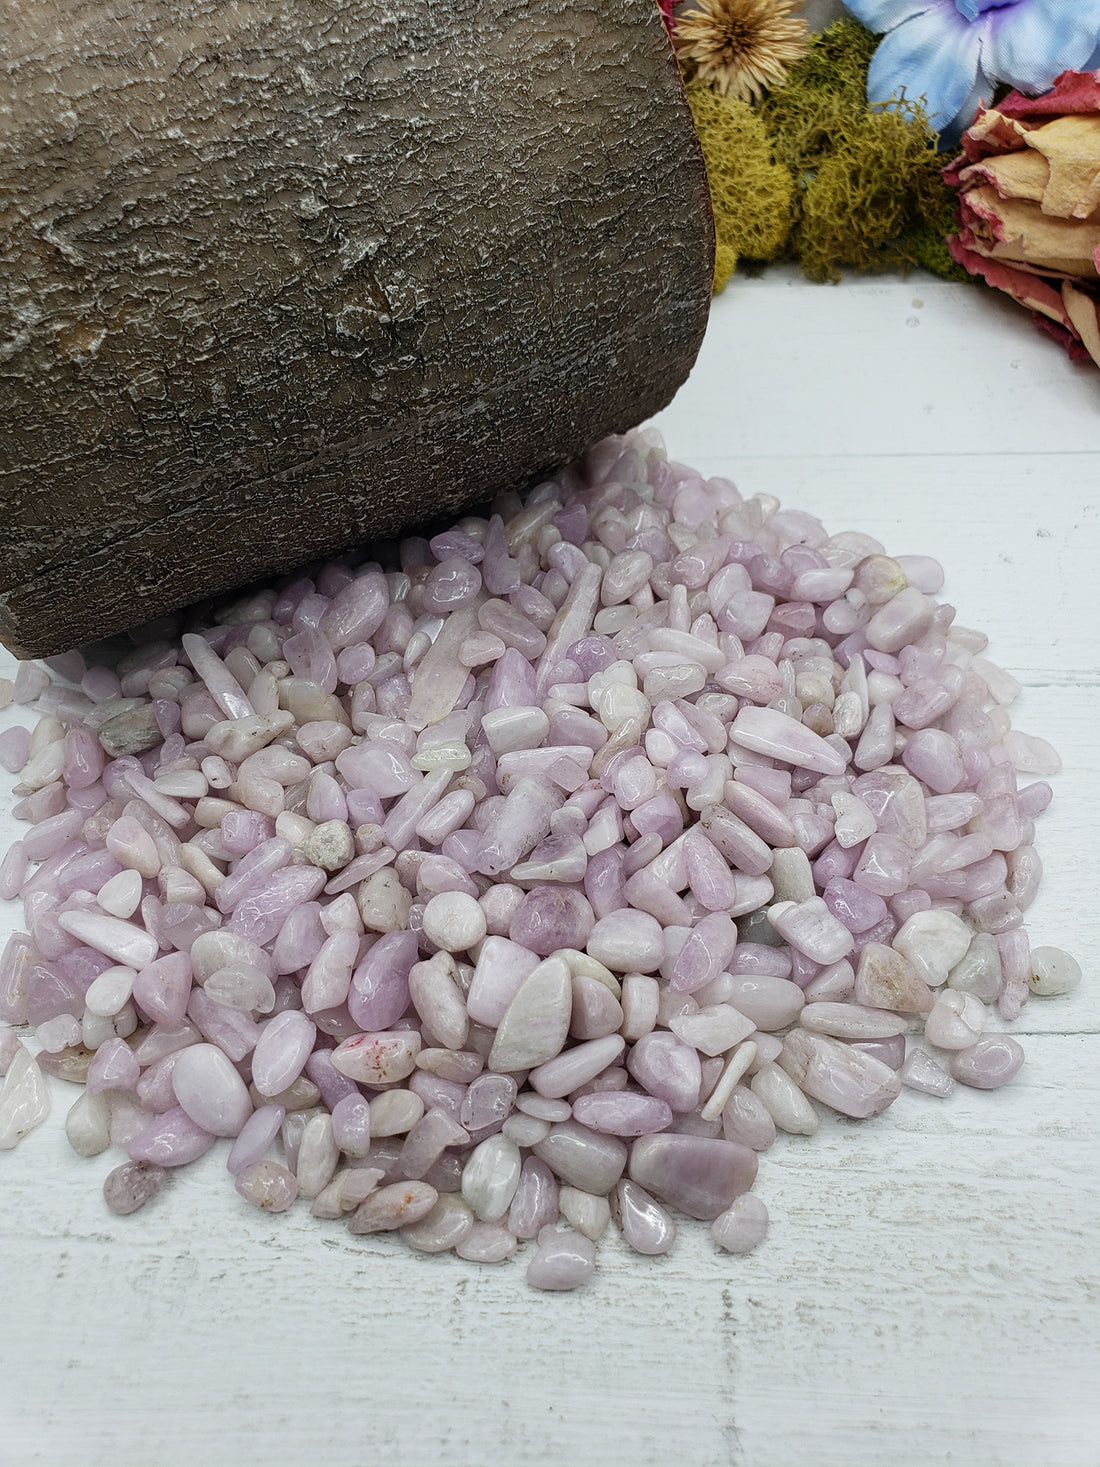 Six ounces of kunzite chips on display